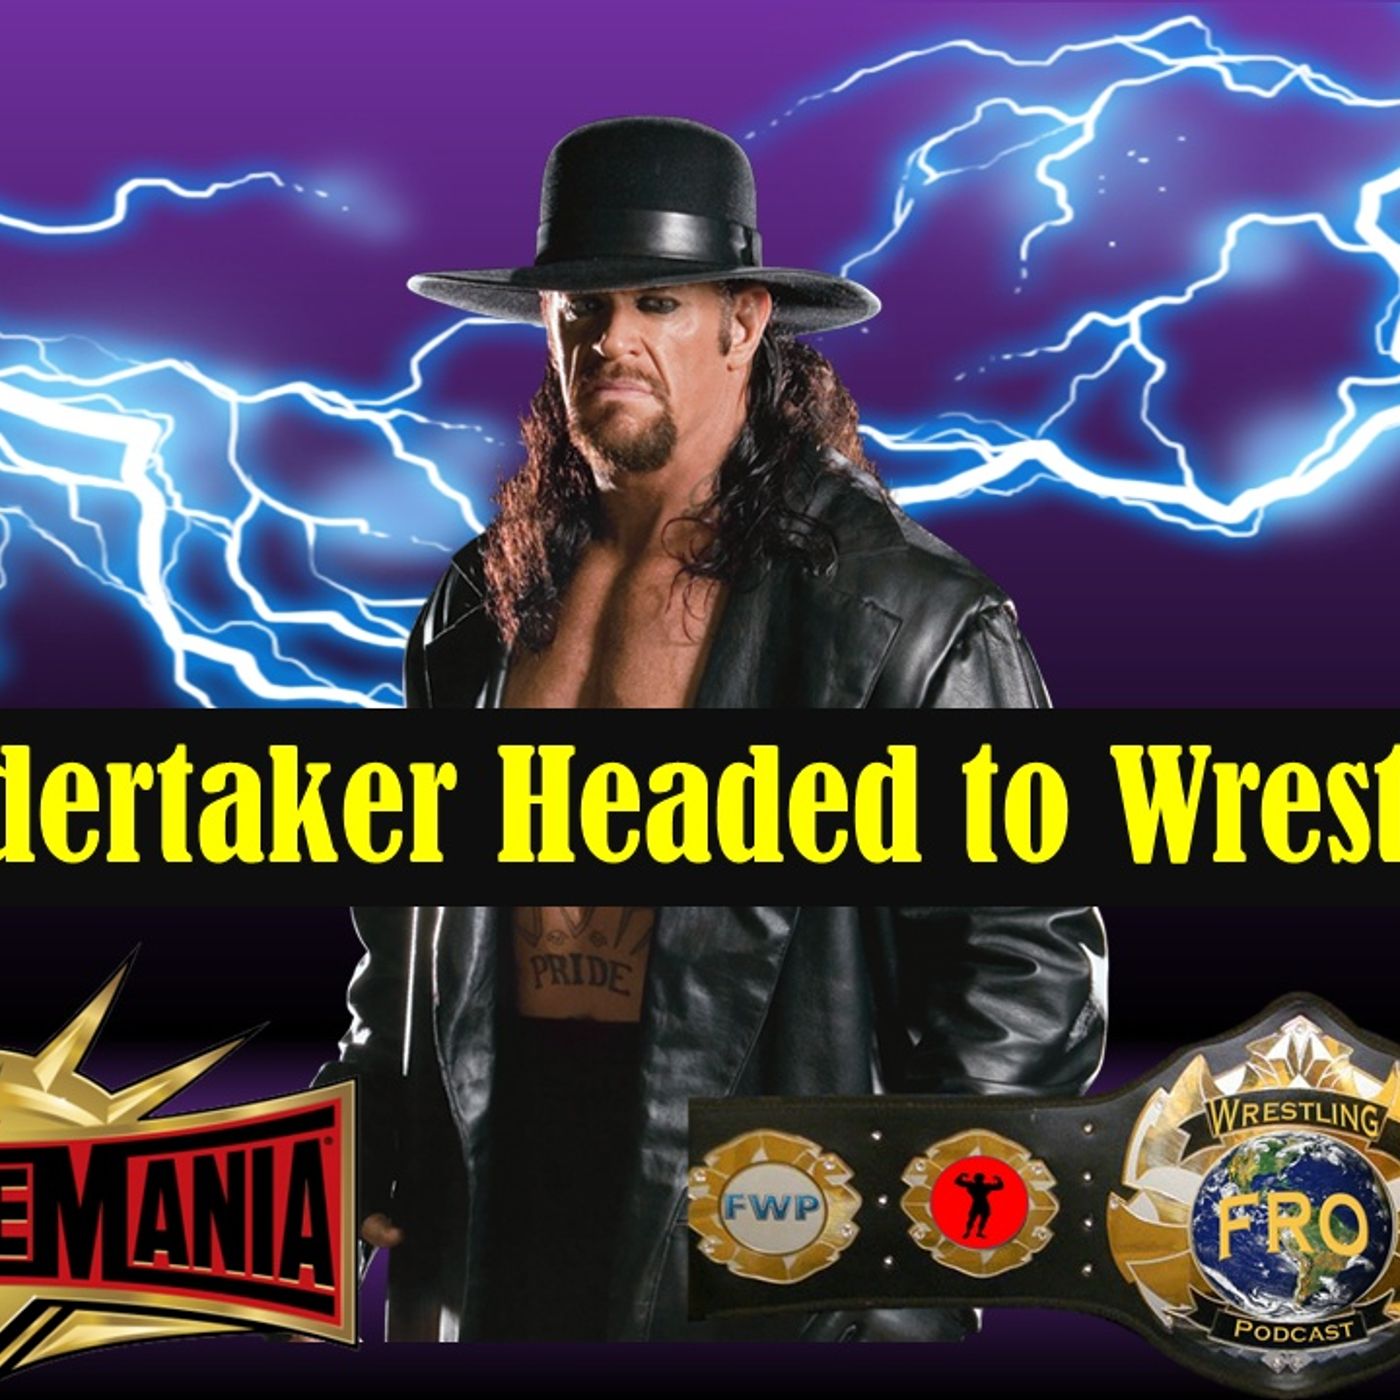 Is the Undertaker Headed to WrestleMania?